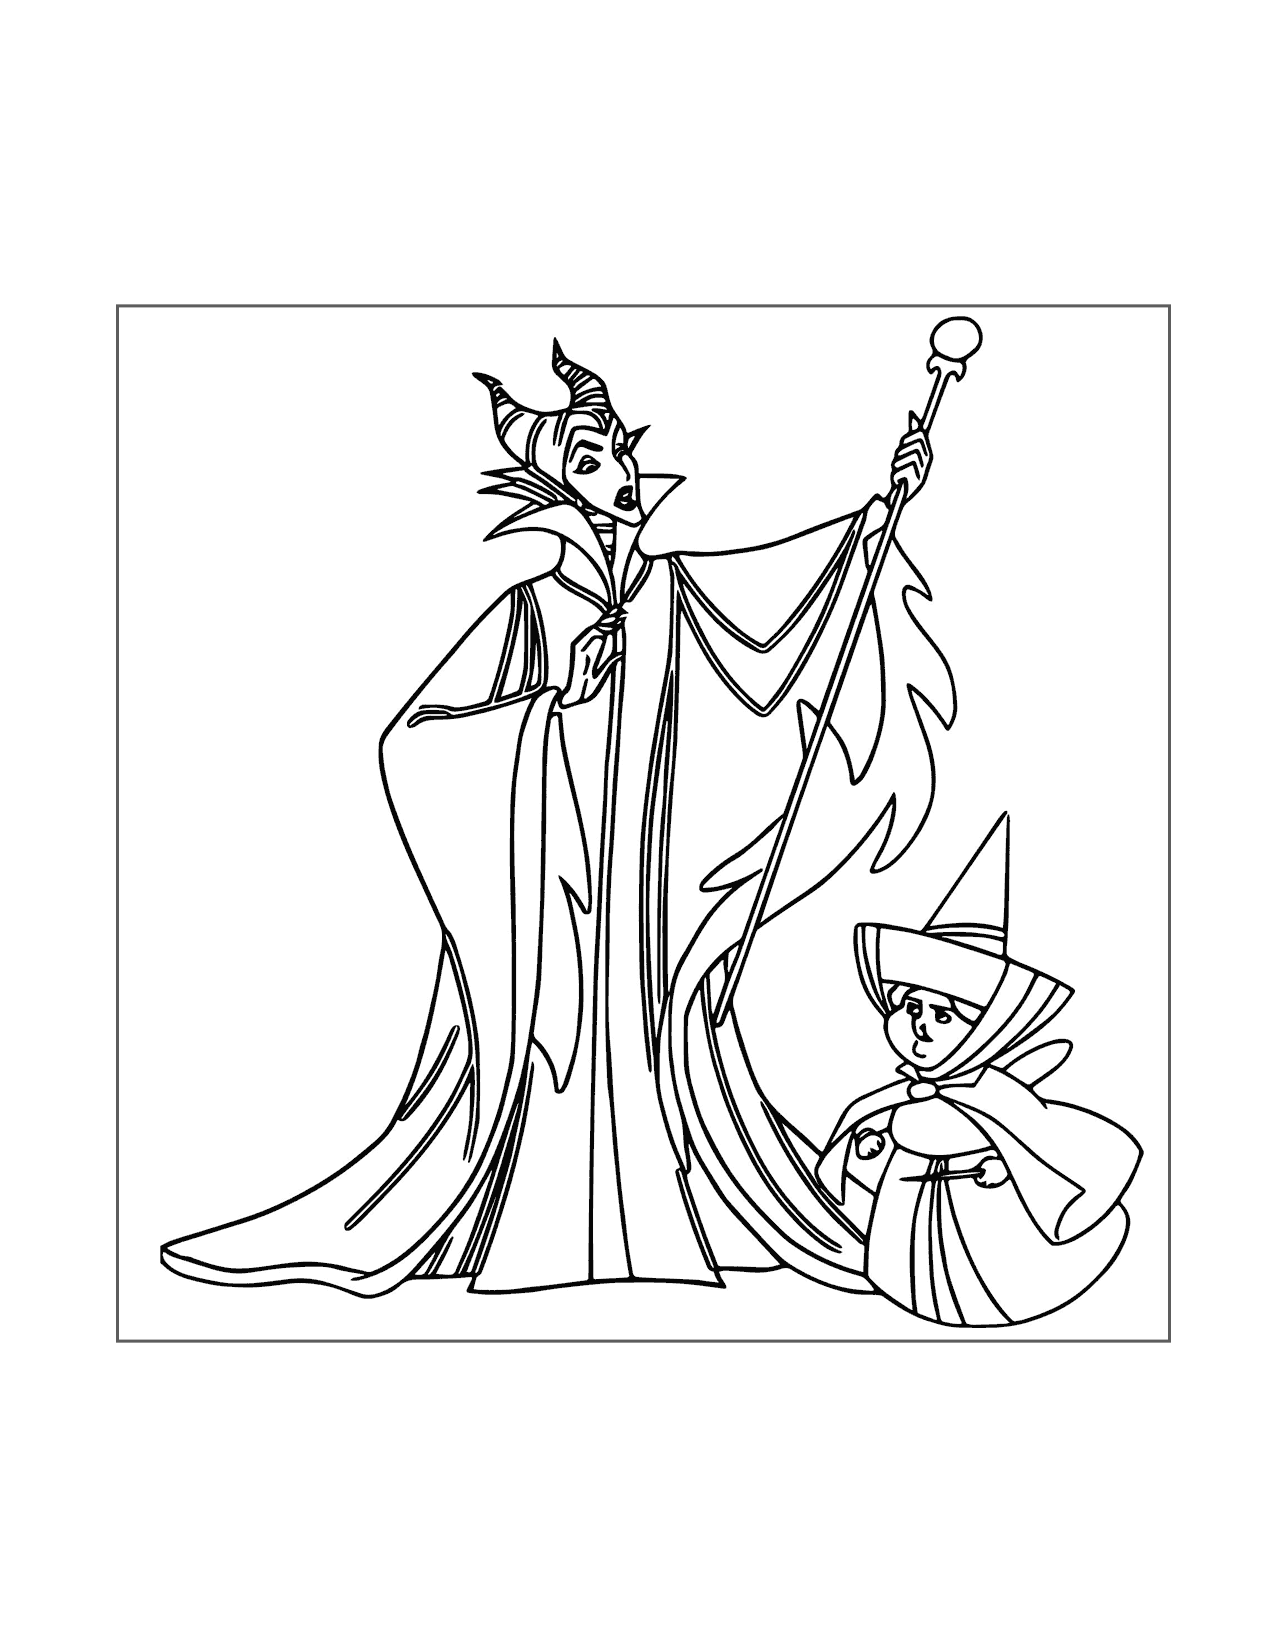 Maleficent And Fairy Sleeping Beauty Coloring Page